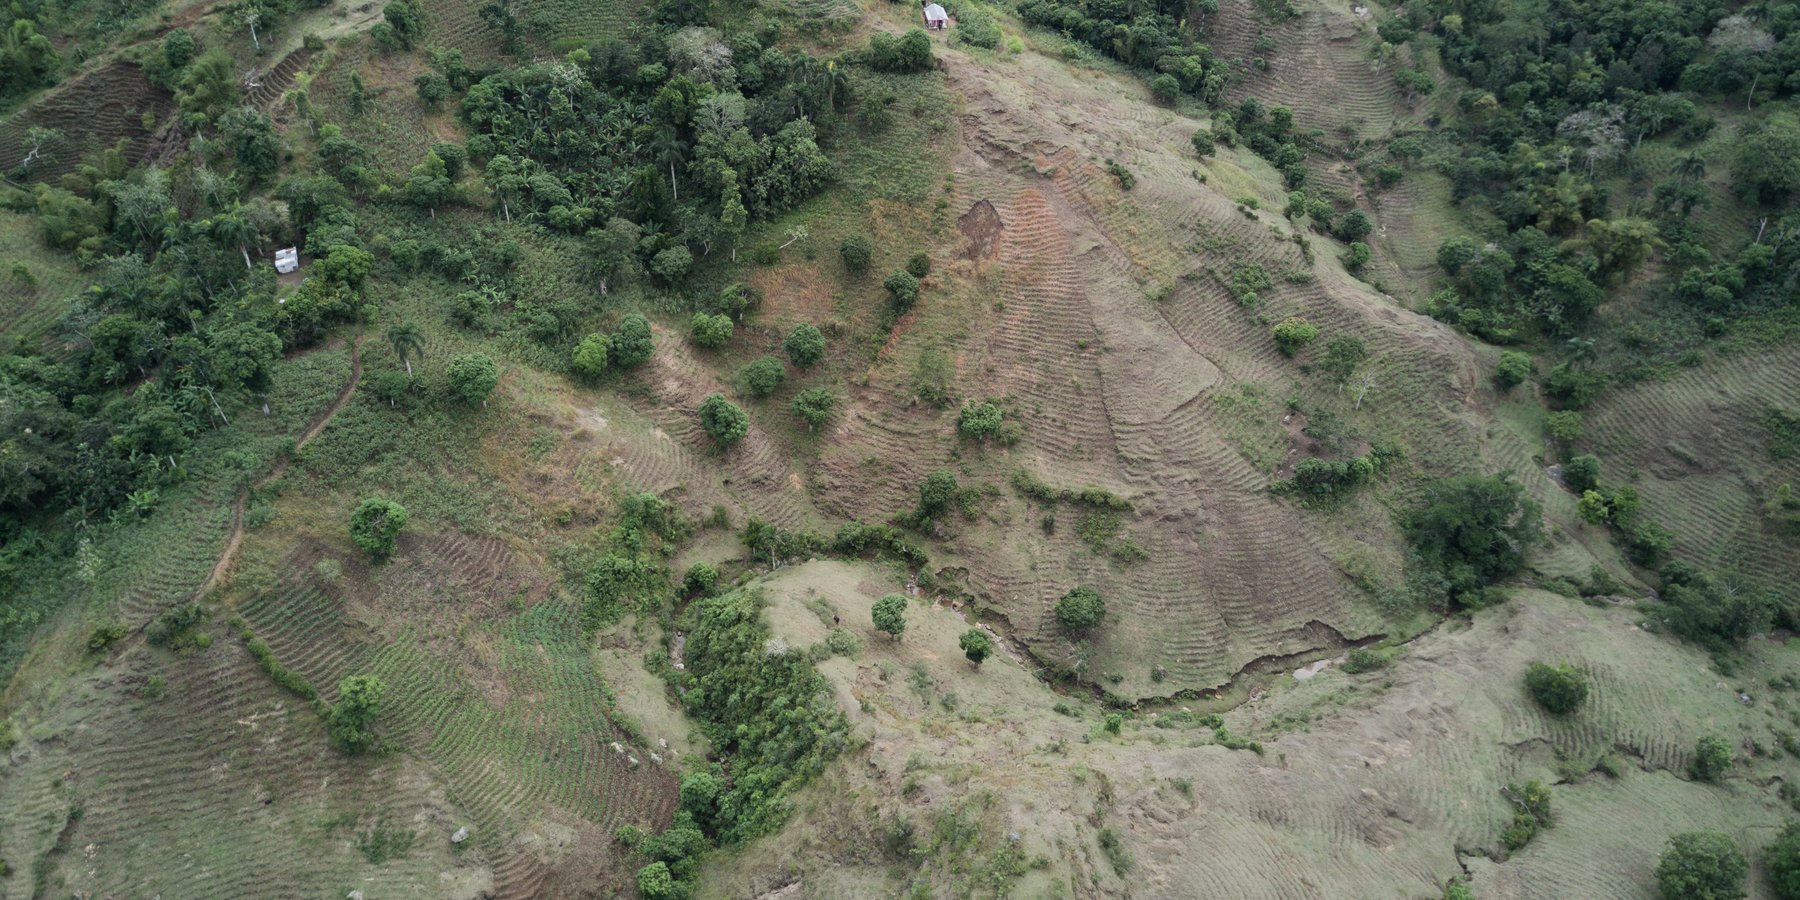 Weeded and ploughed crops / erosive crops on steep slopes in Léogâne, Haiti